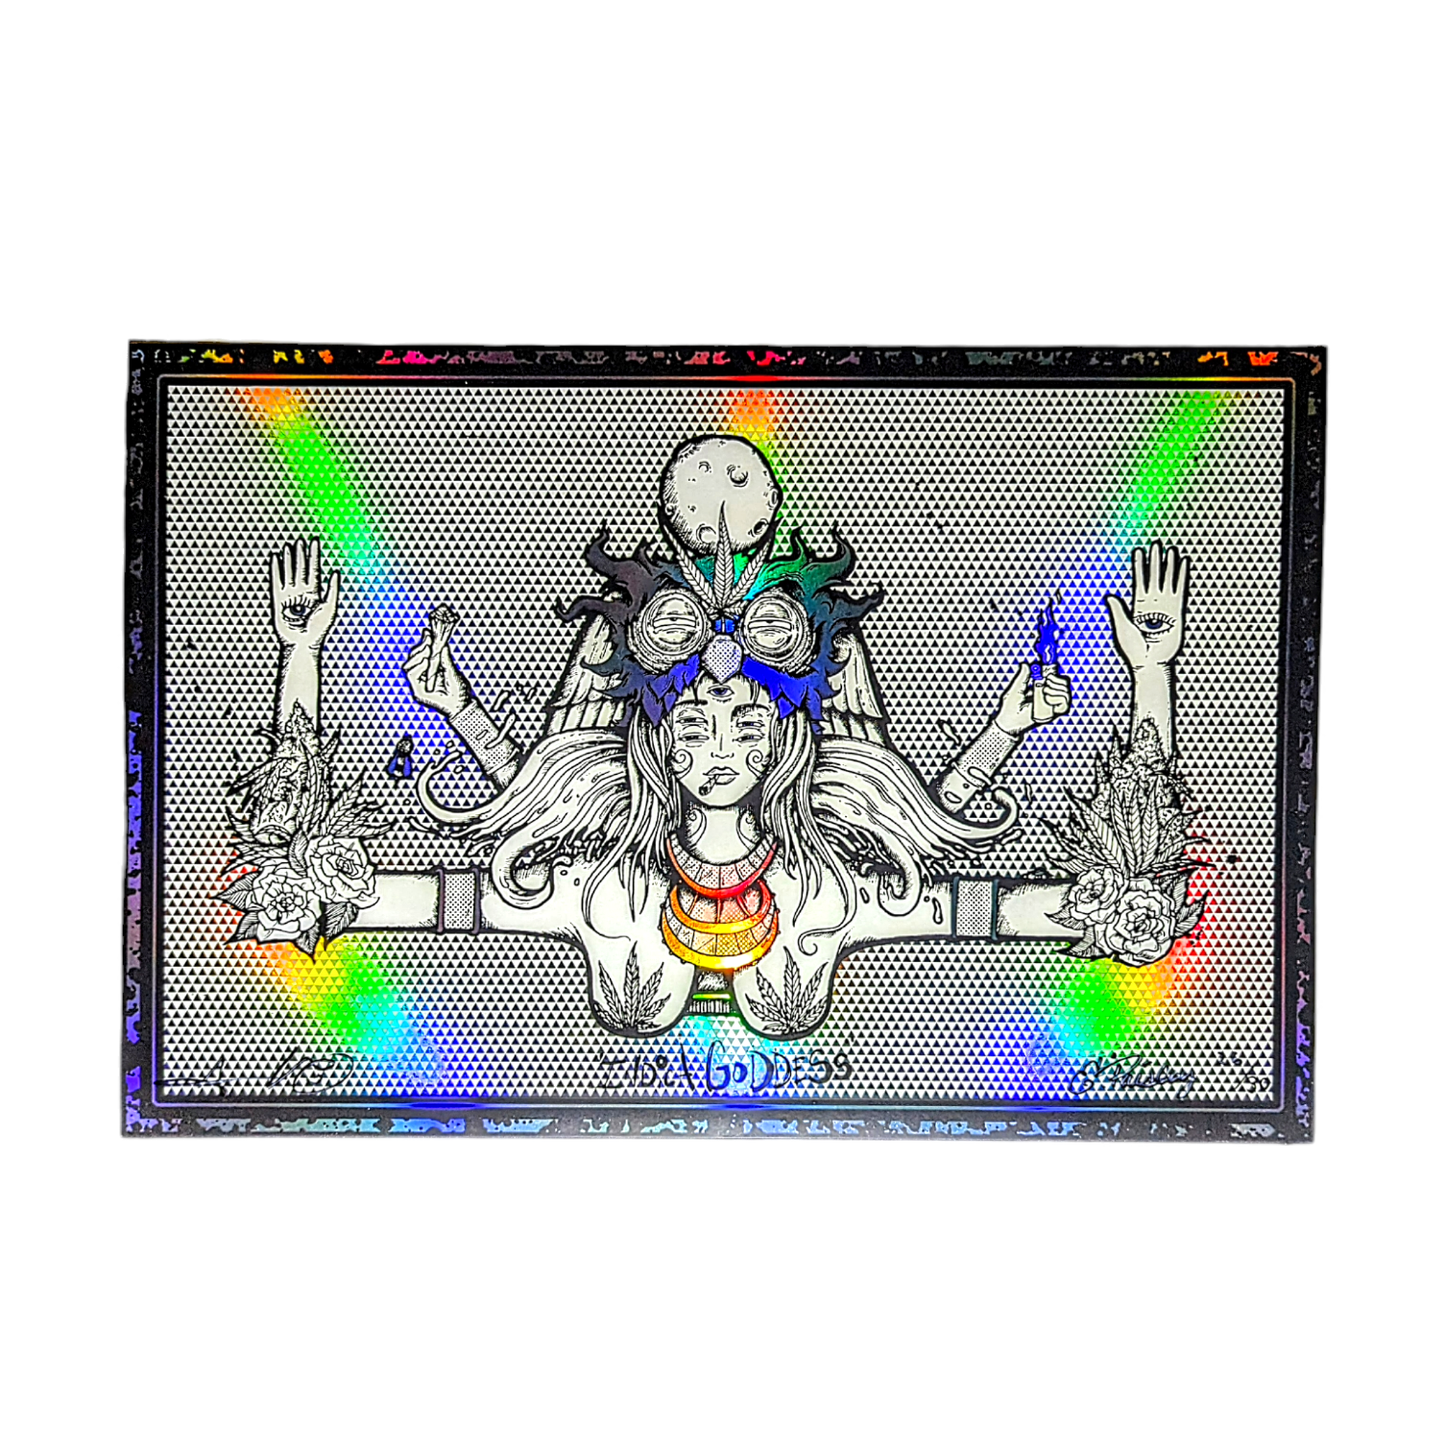 Aaron Brooks x Ellie Paisley Indica Goddess, 2024 3 Color Screen Print on Rainbow Foil 12 x 18 in Edition of 30  Hand Signed + Numbered by the artists. Printed in Colorado by CIK STUDIOS.